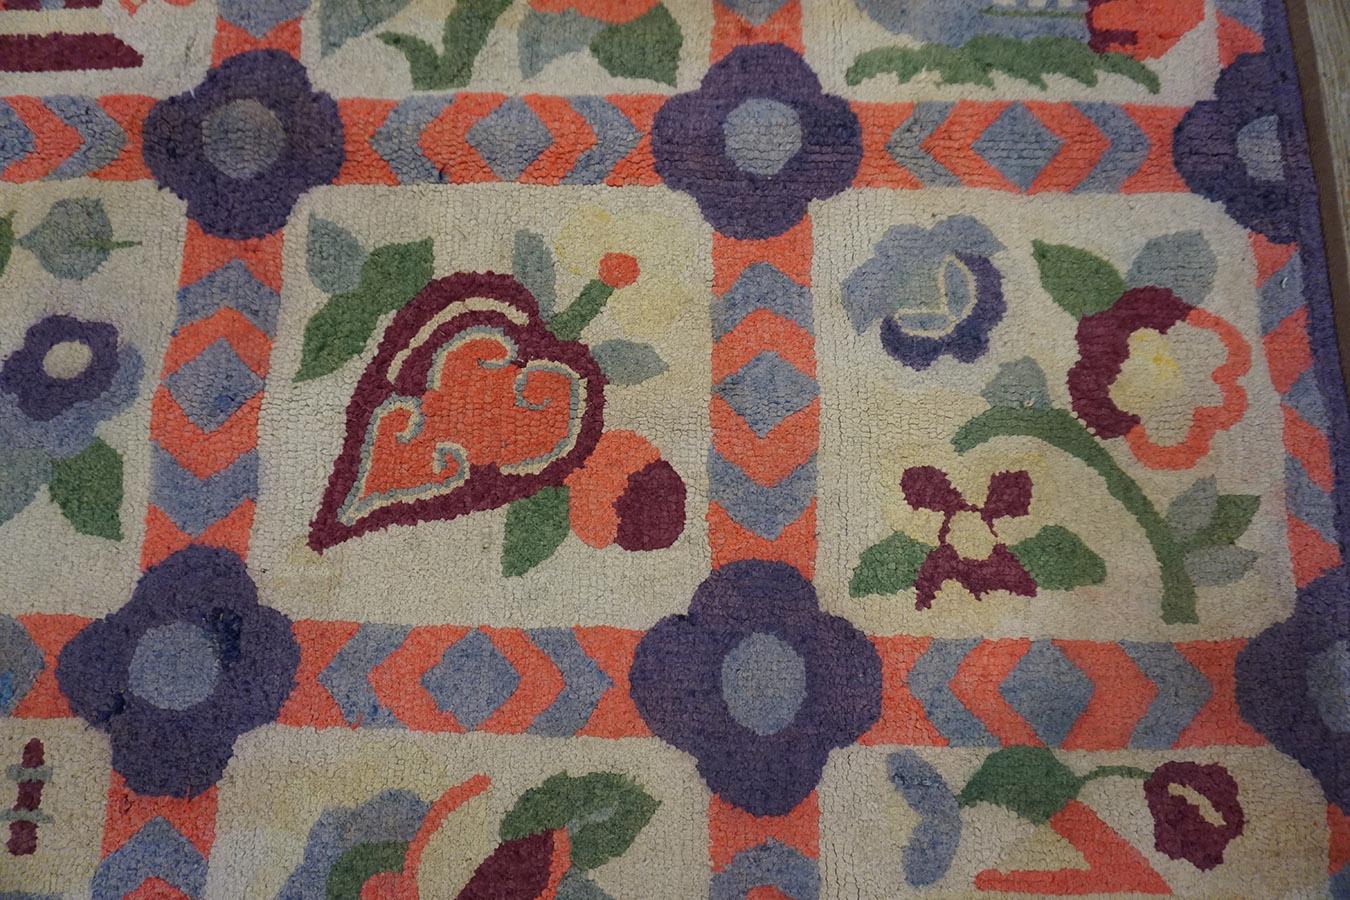 Early 20th Century American Hooked Rug ( 3'9'' x 5'7'' - 114 x 170 ) For Sale 5